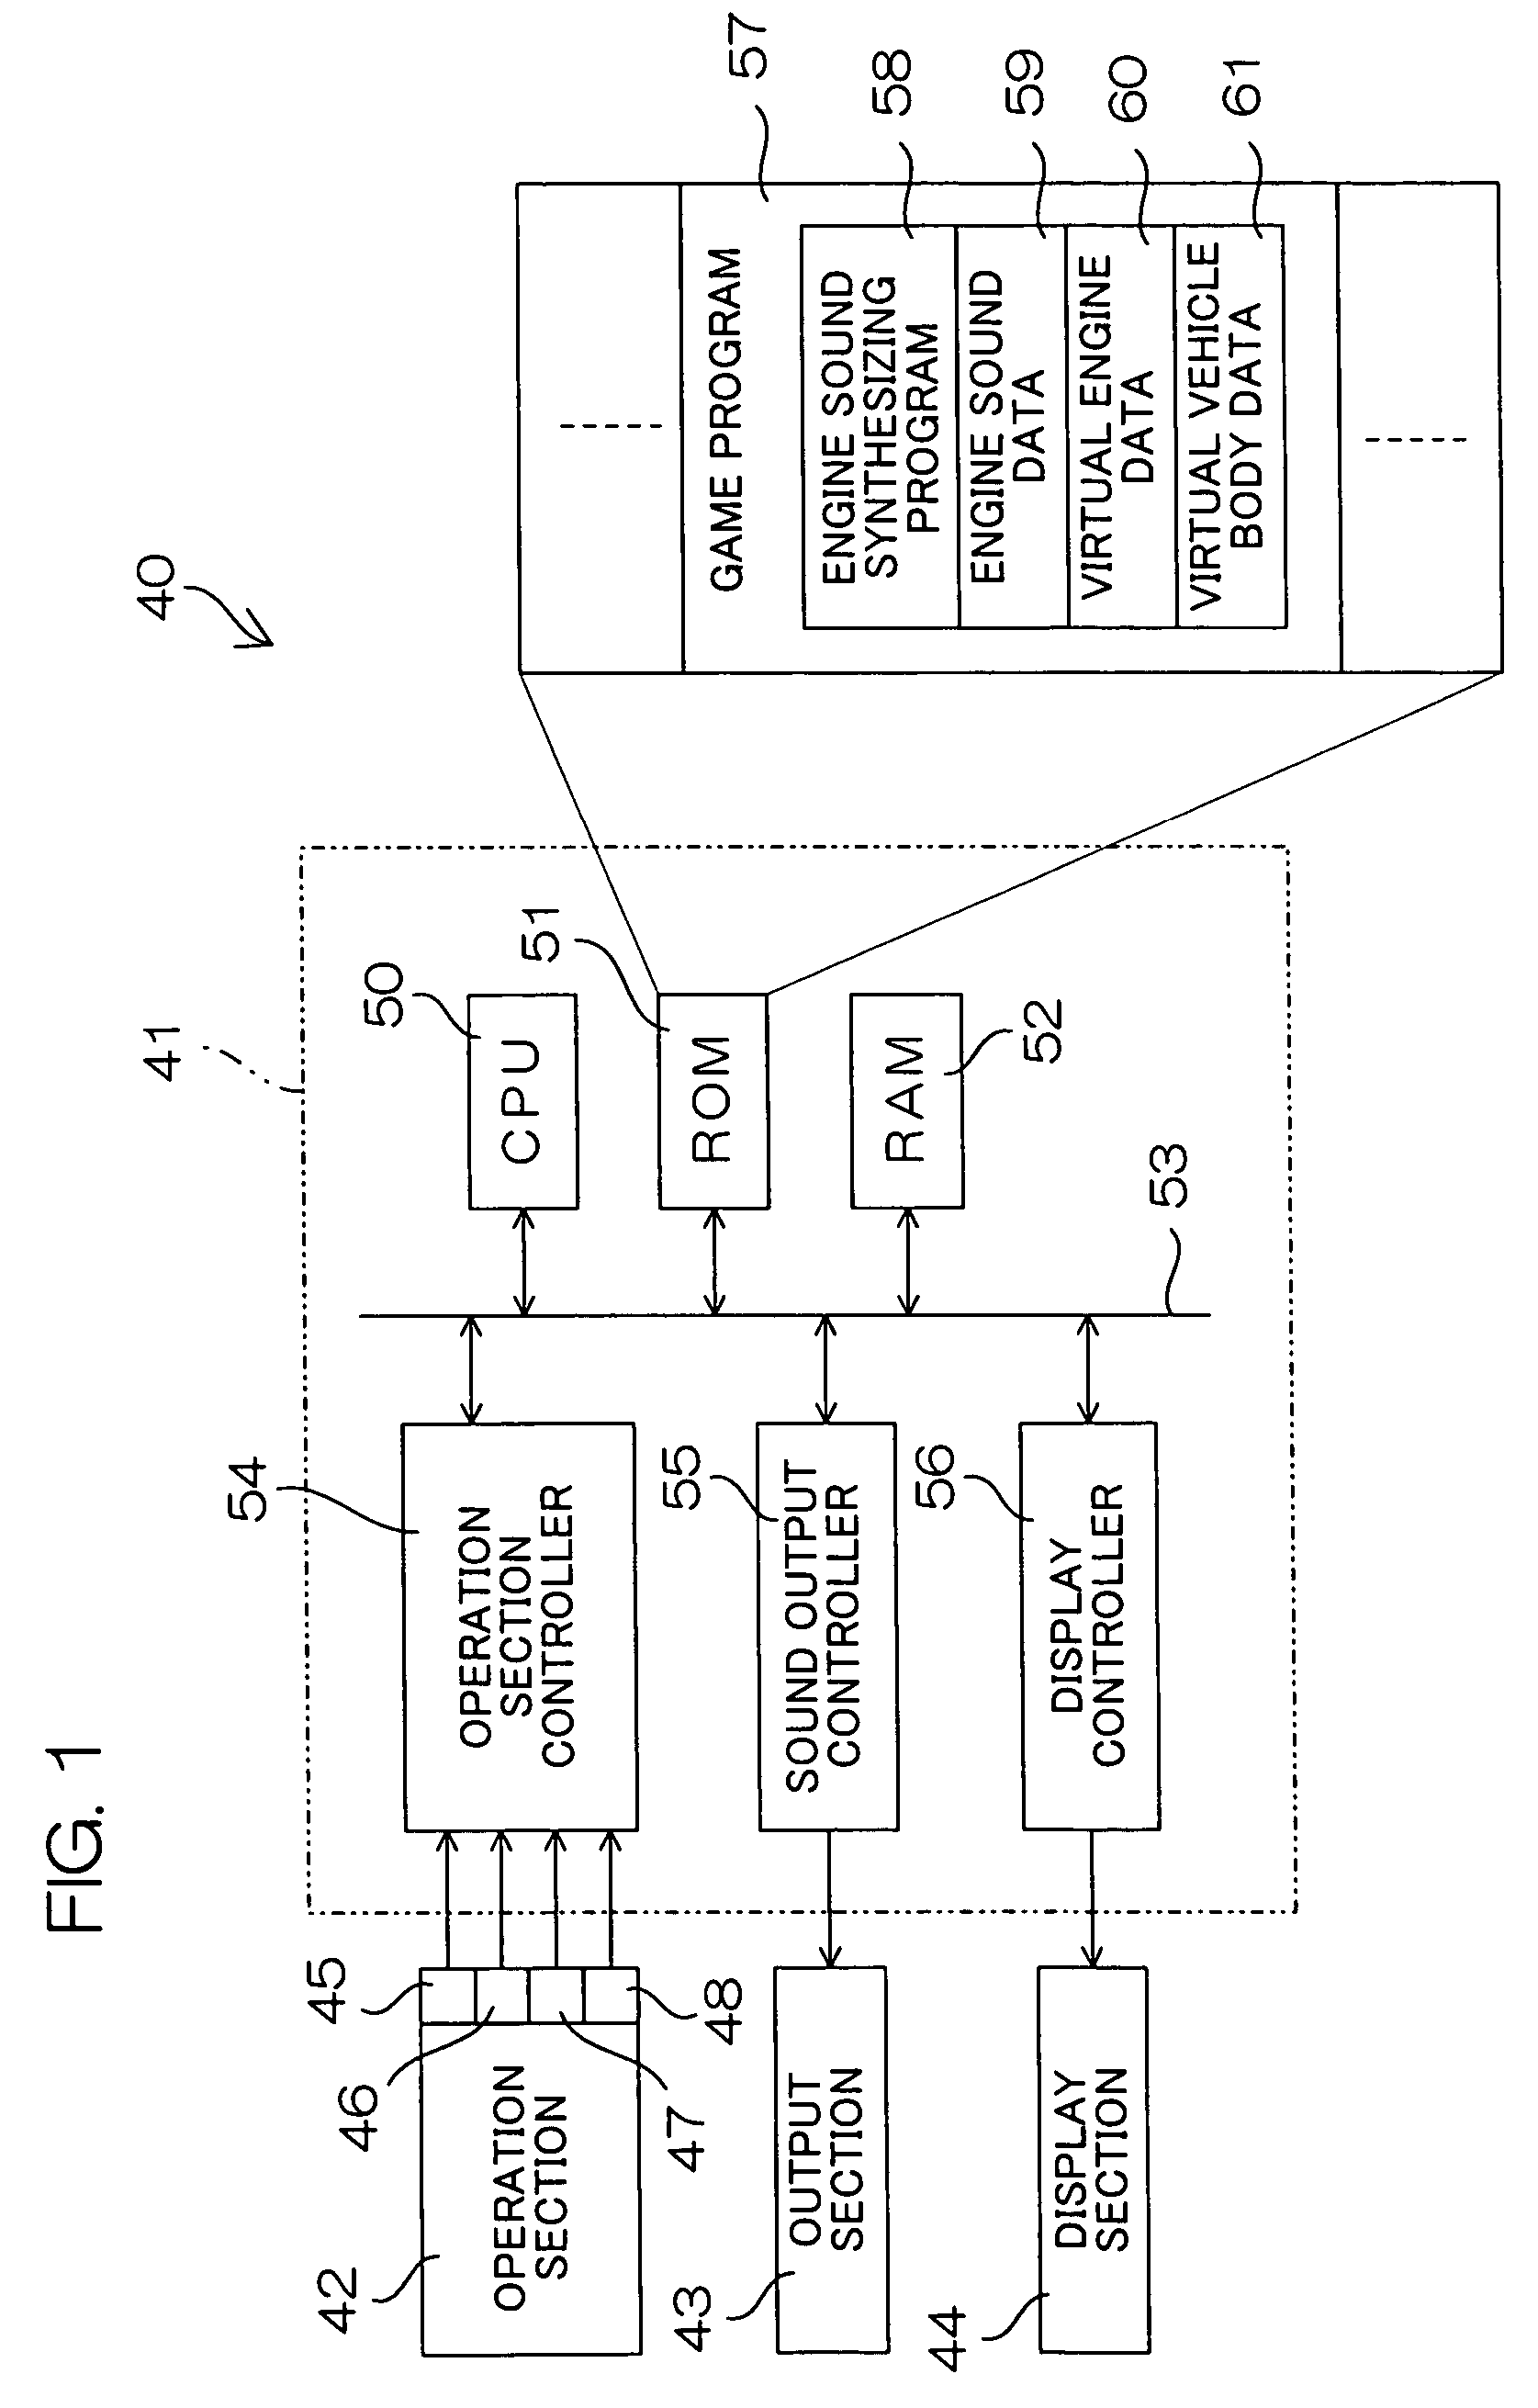 Engine sound synthesizer, motor vehicle and game machine employing the engine sound synthesizer, engine sound synthesizing method, and recording medium containing computer program for engine sound synthesis